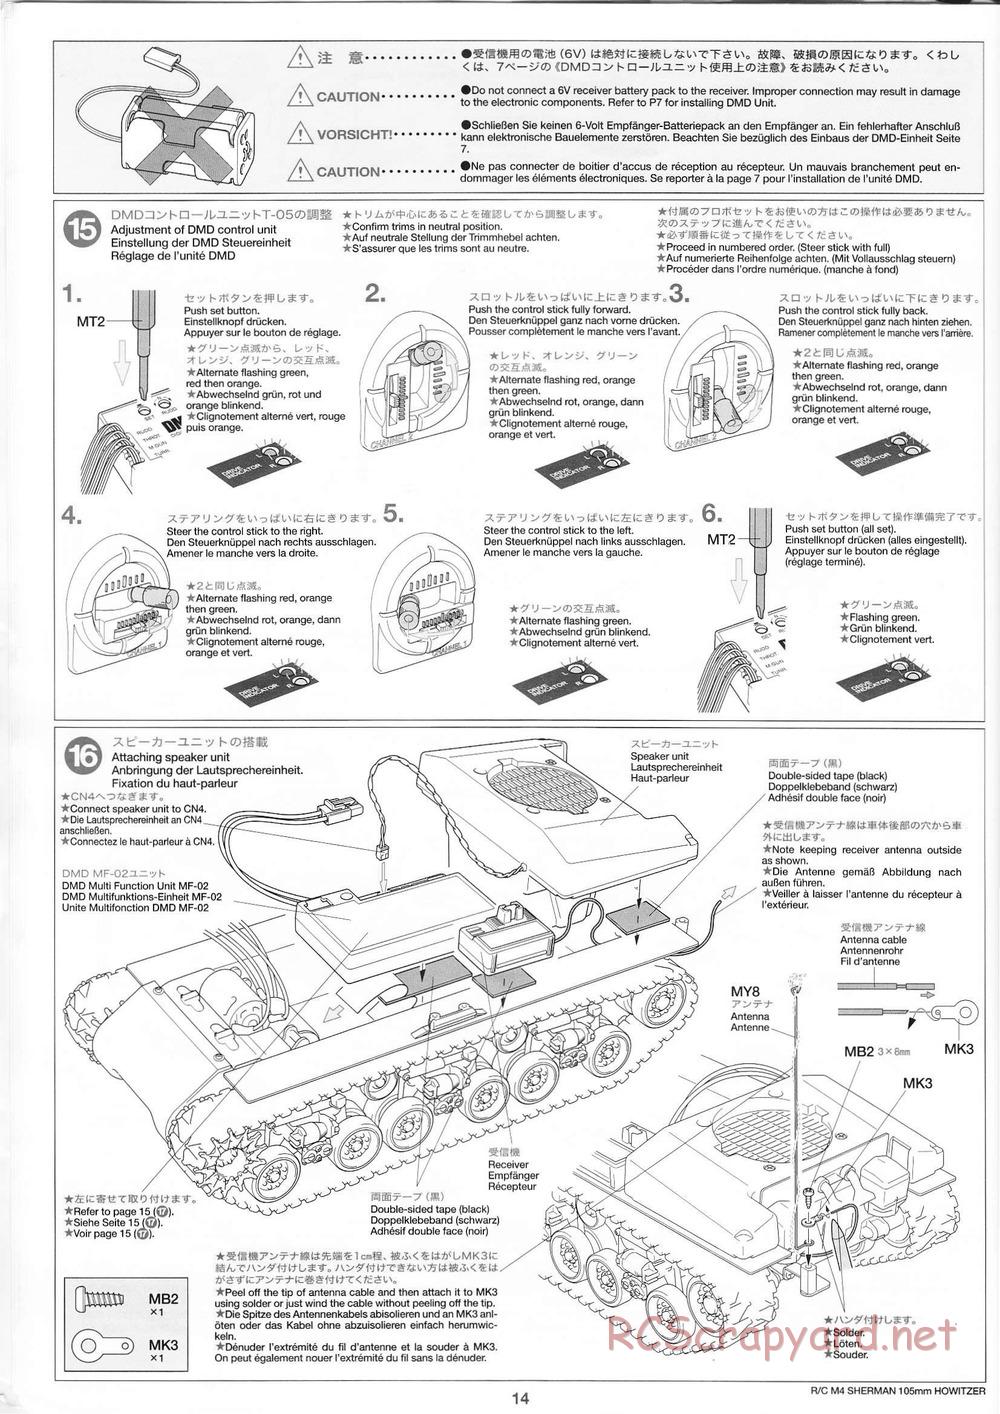 Tamiya - M4 Sherman 105mm Howitzer - 1/16 Scale Chassis - Manual - Page 14